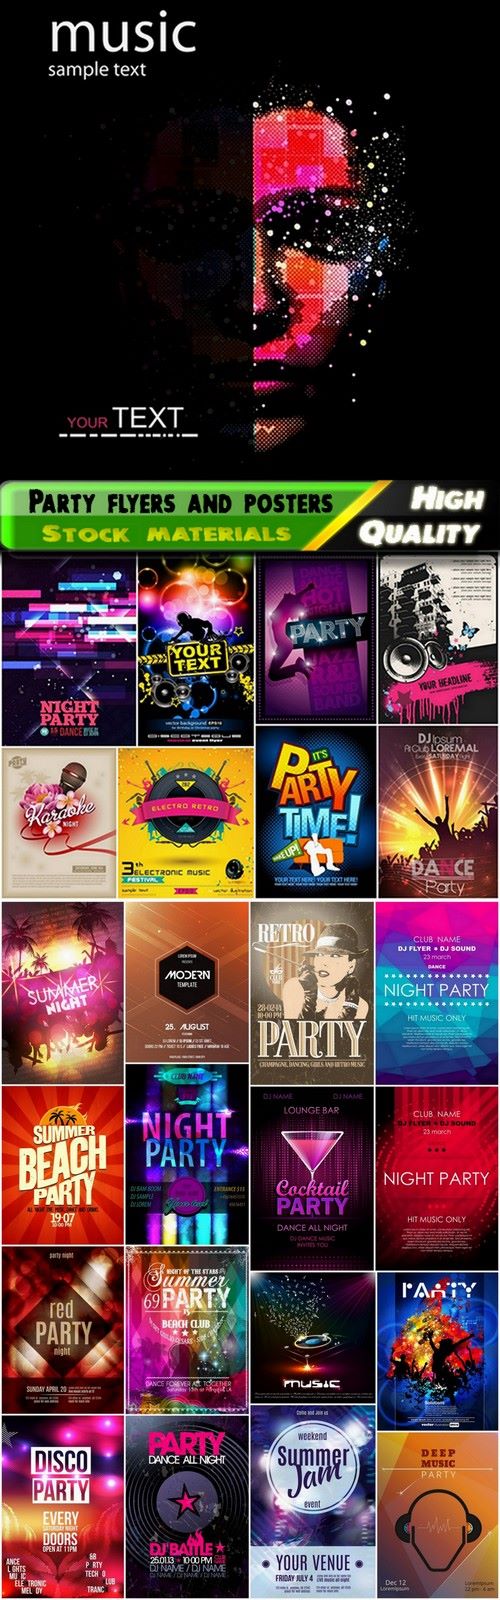 Party flyers and posters for laser disco show 2 - 25 Eps